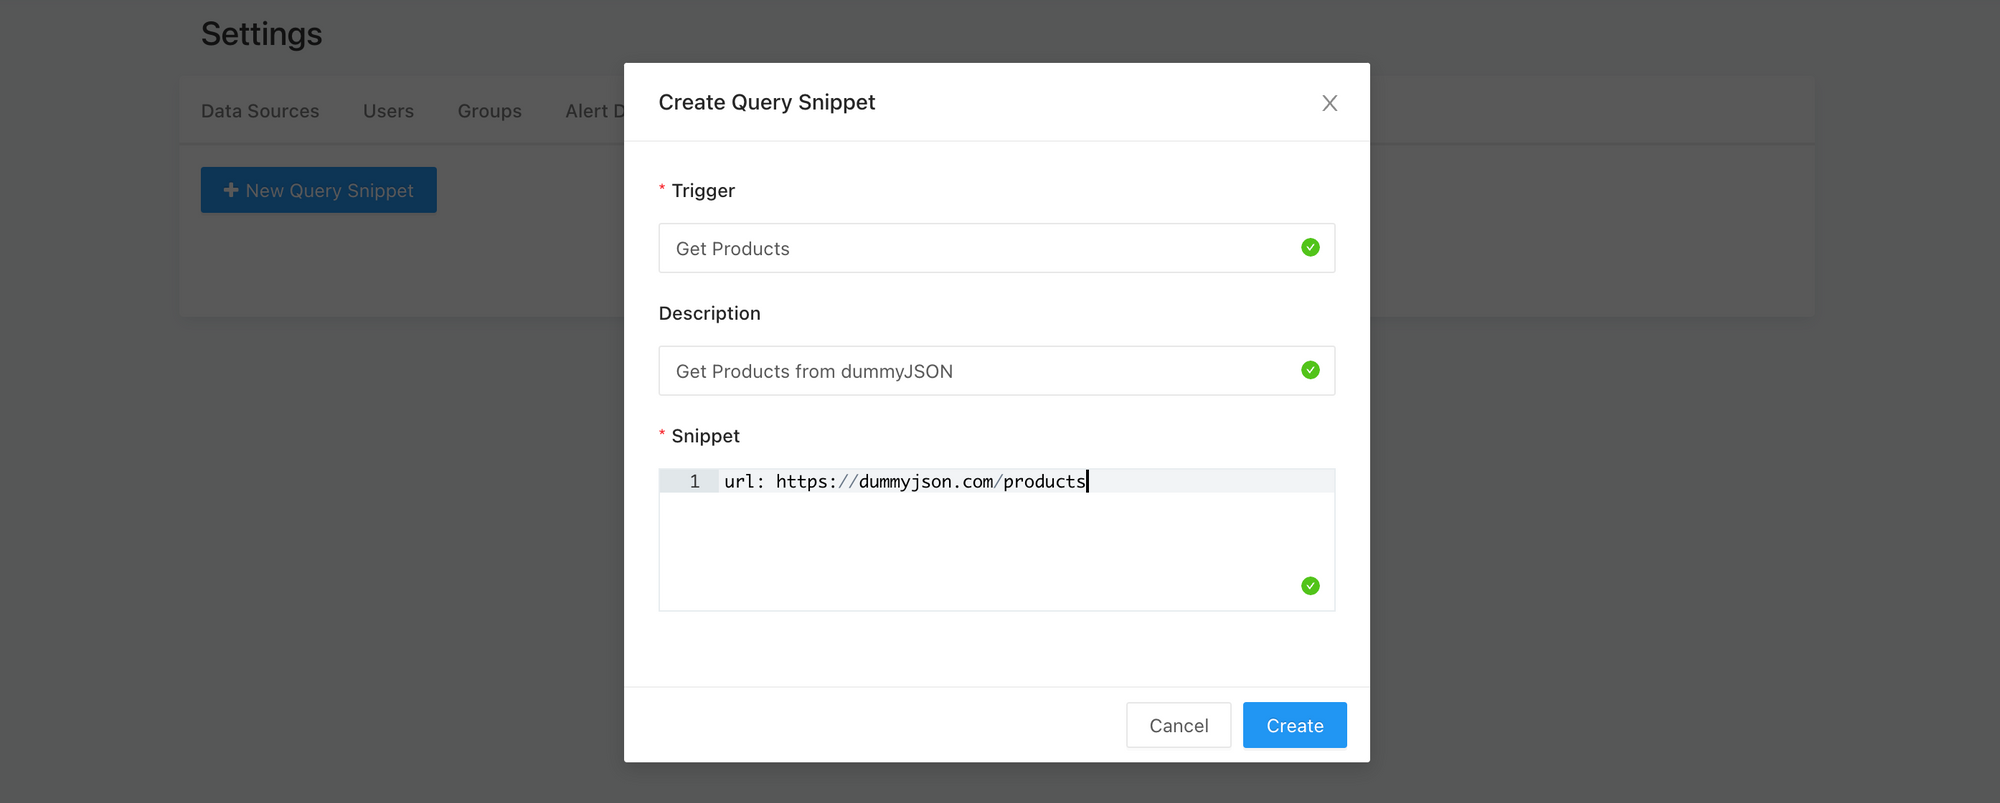 Create a query snippet